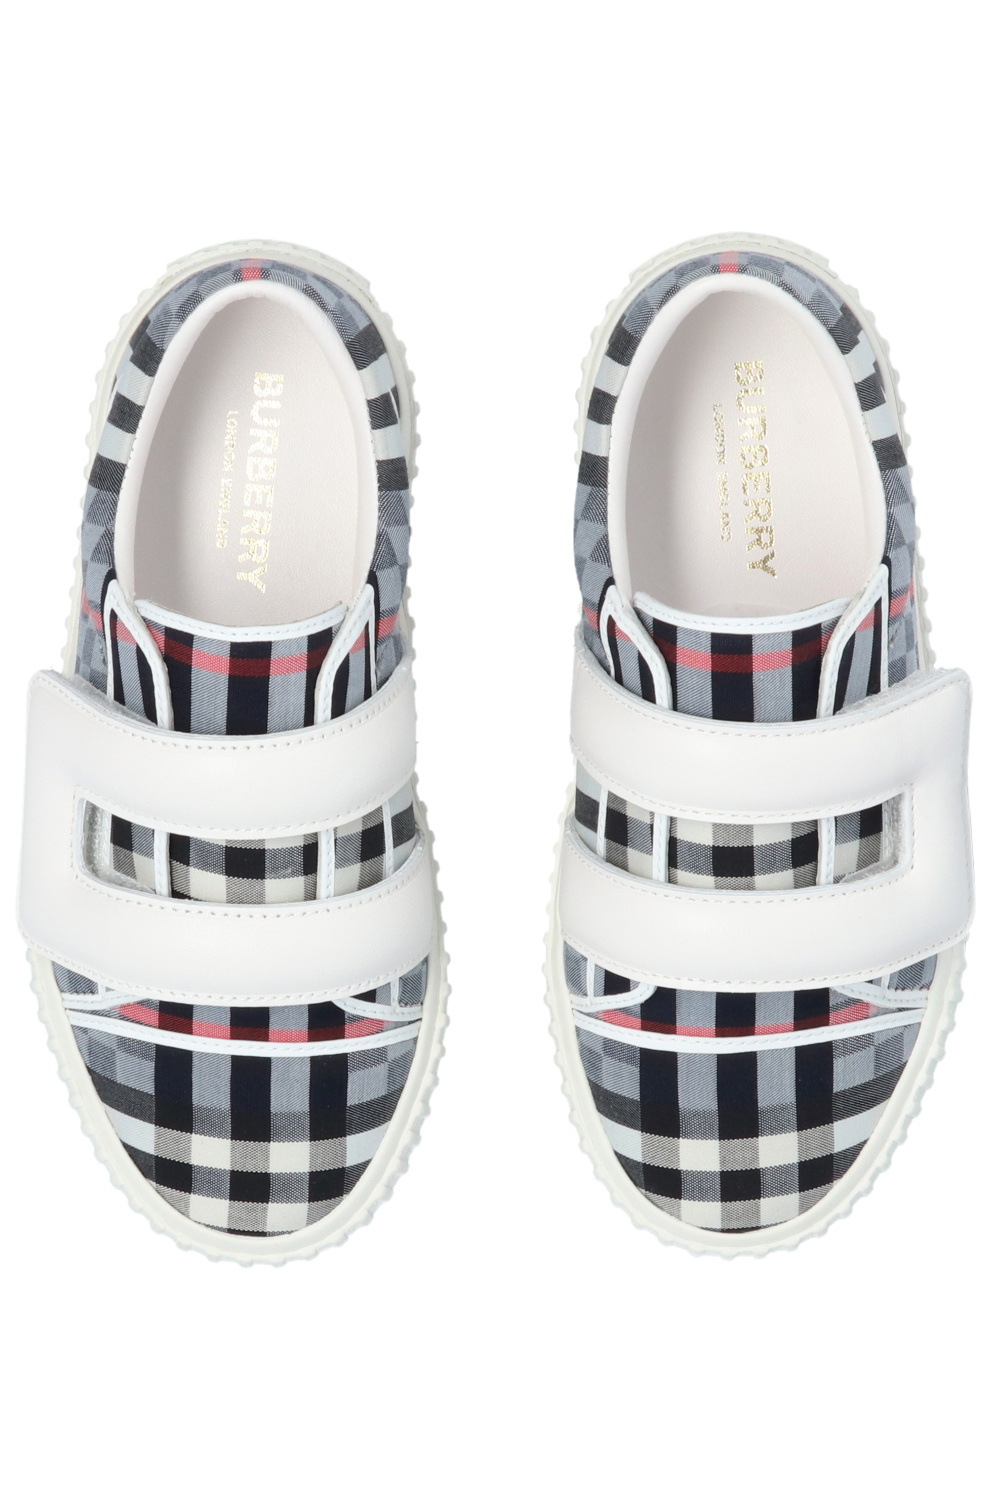 burberry Leather Kids Checked sneakers